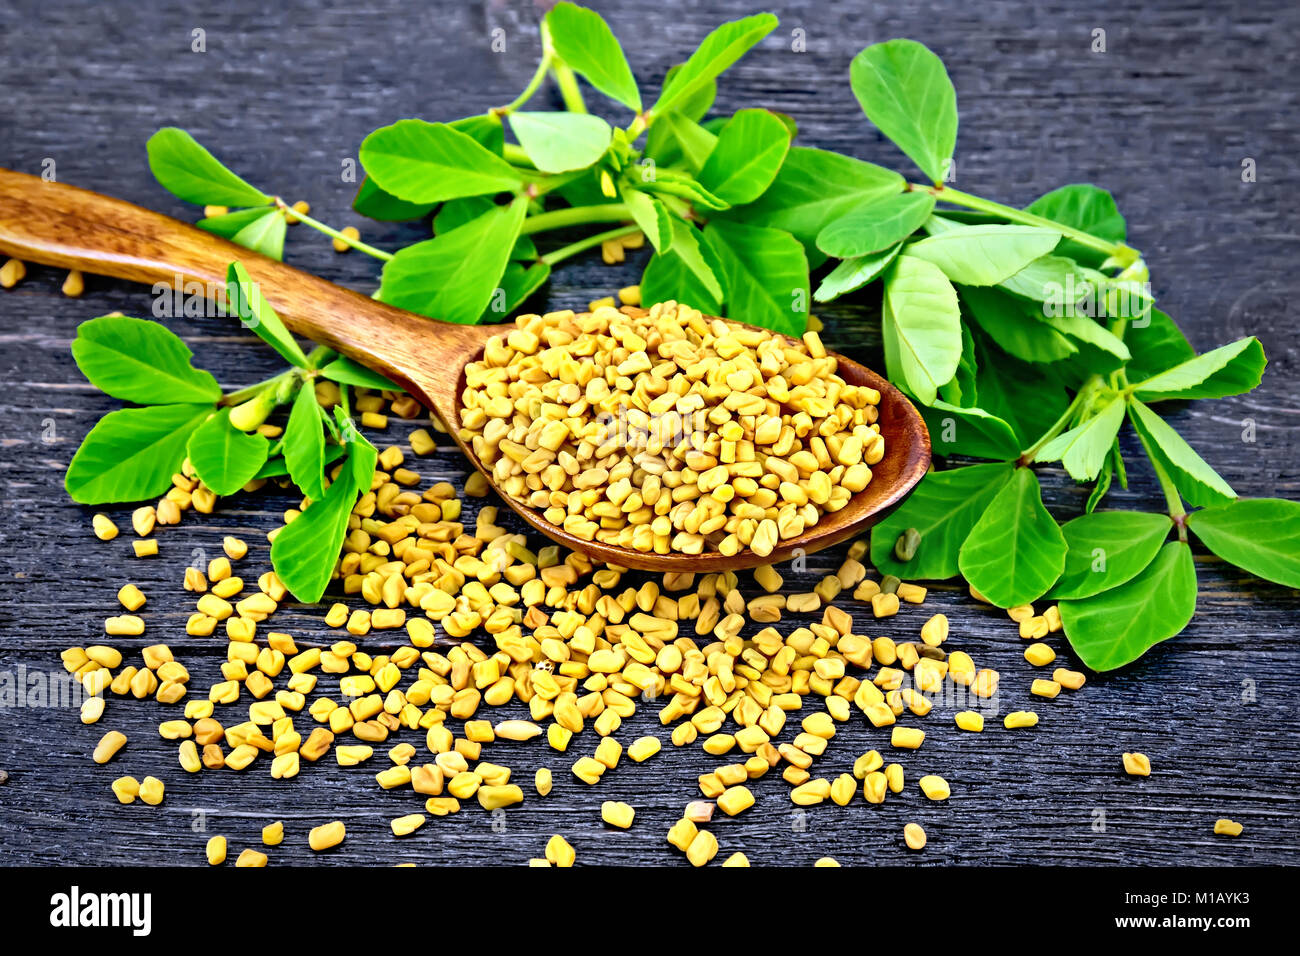 Fenugreek seeds in a spoon and on a table with green leaves on a wooden plank background Stock Photo